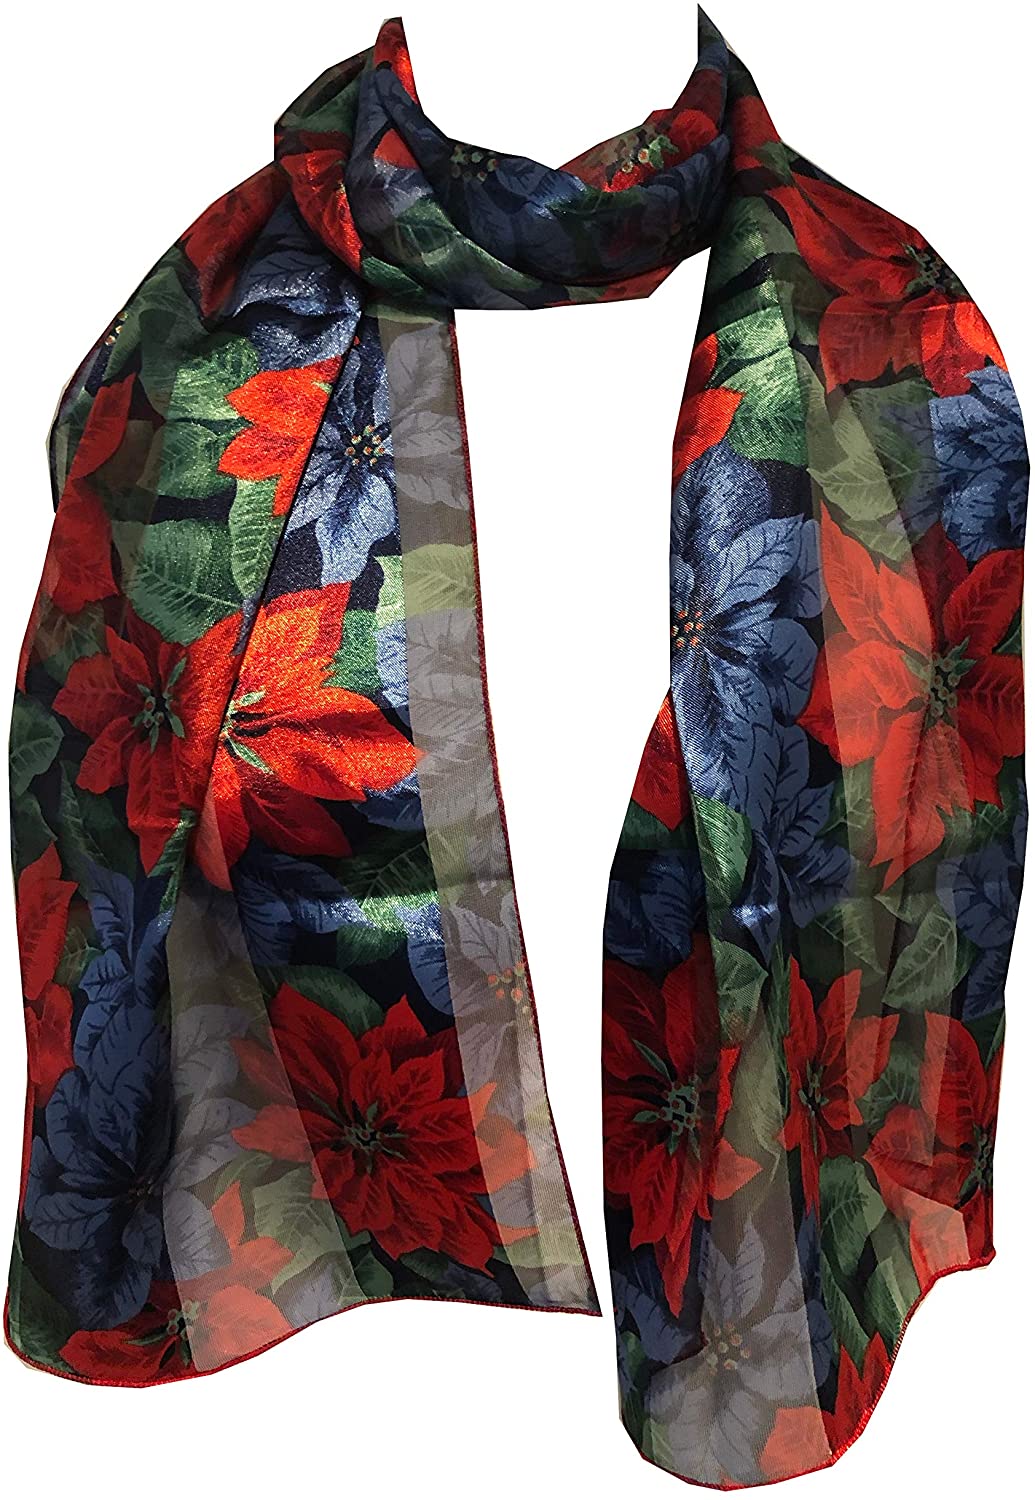 Pamper Yourself Now Blue and red Poinsettia Flower Design Scarf Thin Pretty Christmas Scarf